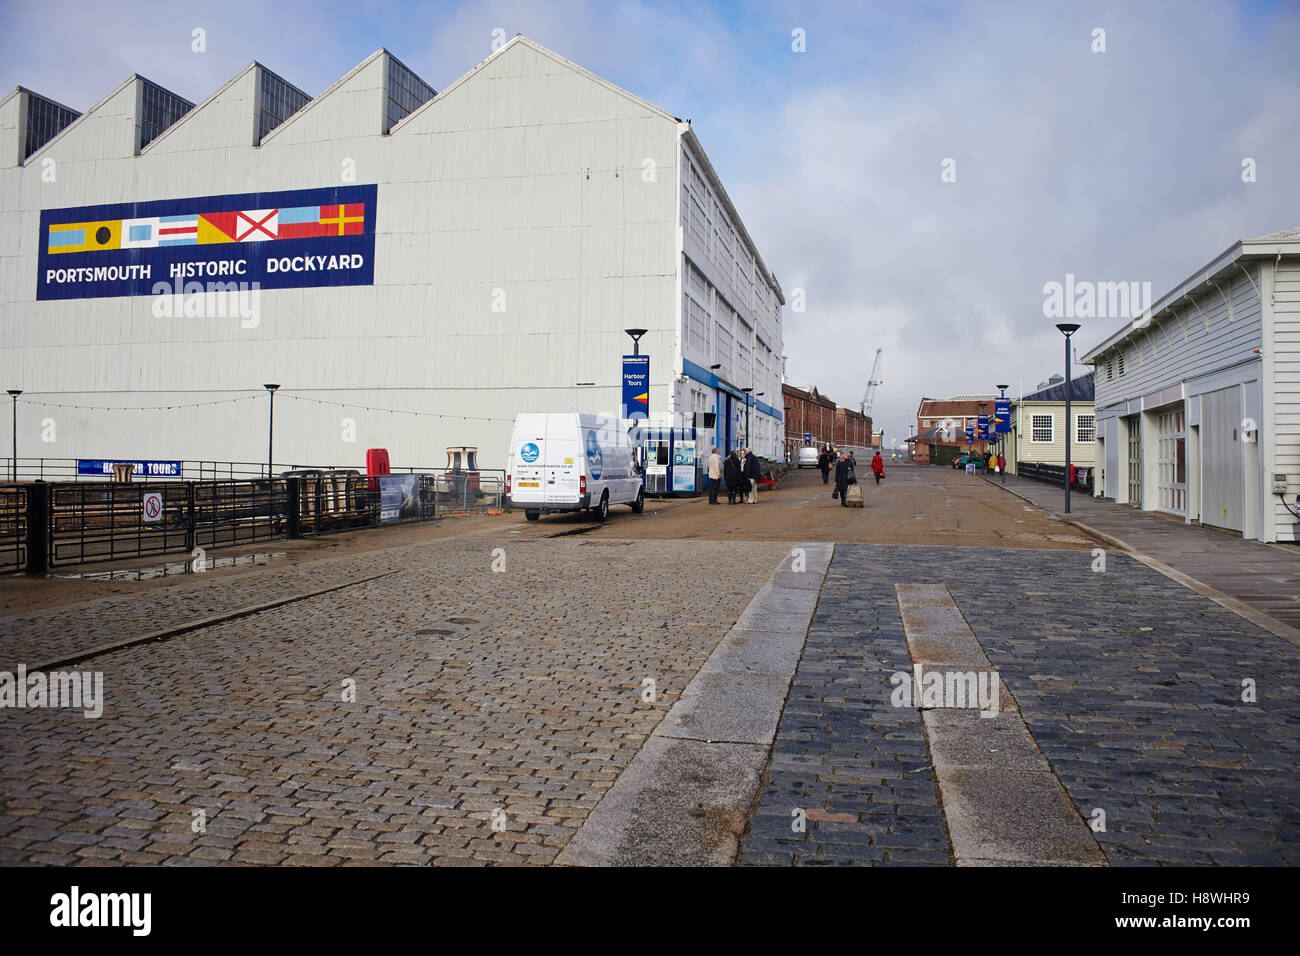 General view of Portsmouth Historic Dockyard Stock Photo